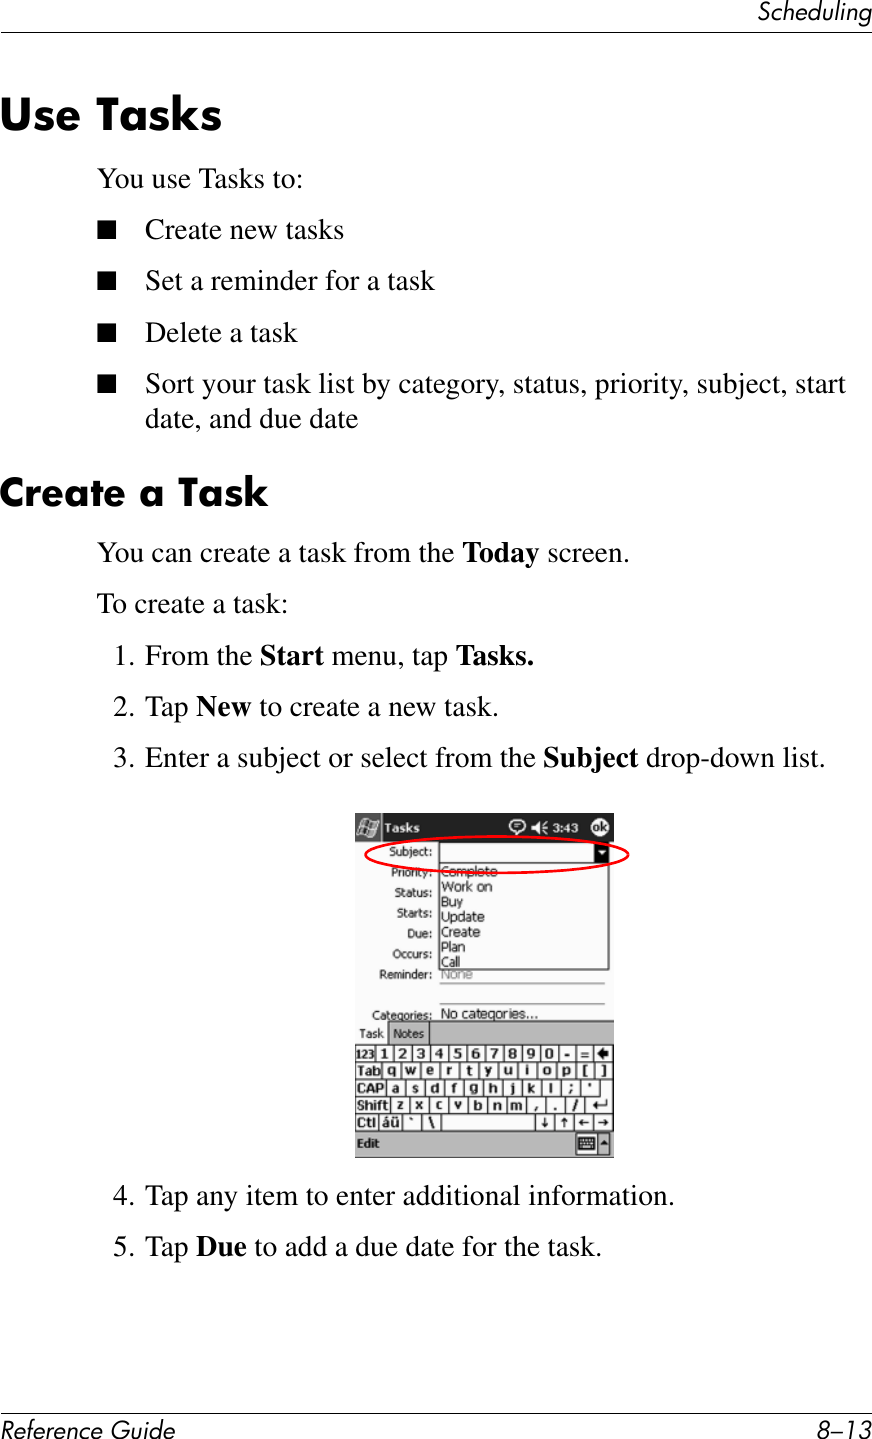 3&amp;Q&quot;+)K*%2!&quot;#&quot;$&quot;%&amp;&quot;&apos;()*+&quot; G/.938&quot;&amp;4;8T8You use Tasks to:■Create new tasks■Set a reminder for a task■Delete a task■Sort your task list by category, status, priority, subject, start date, and due date2!&quot;;7&quot;&amp;;&amp;4;8TYou can create a task from the Today screen.To create a task:1. From the Start menu, tap Tasks.2. Tap New to create a new task.3. Enter a subject or select from the Subject drop-down list.4. Tap any item to enter additional information.5. Tap Due to add a due date for the task.